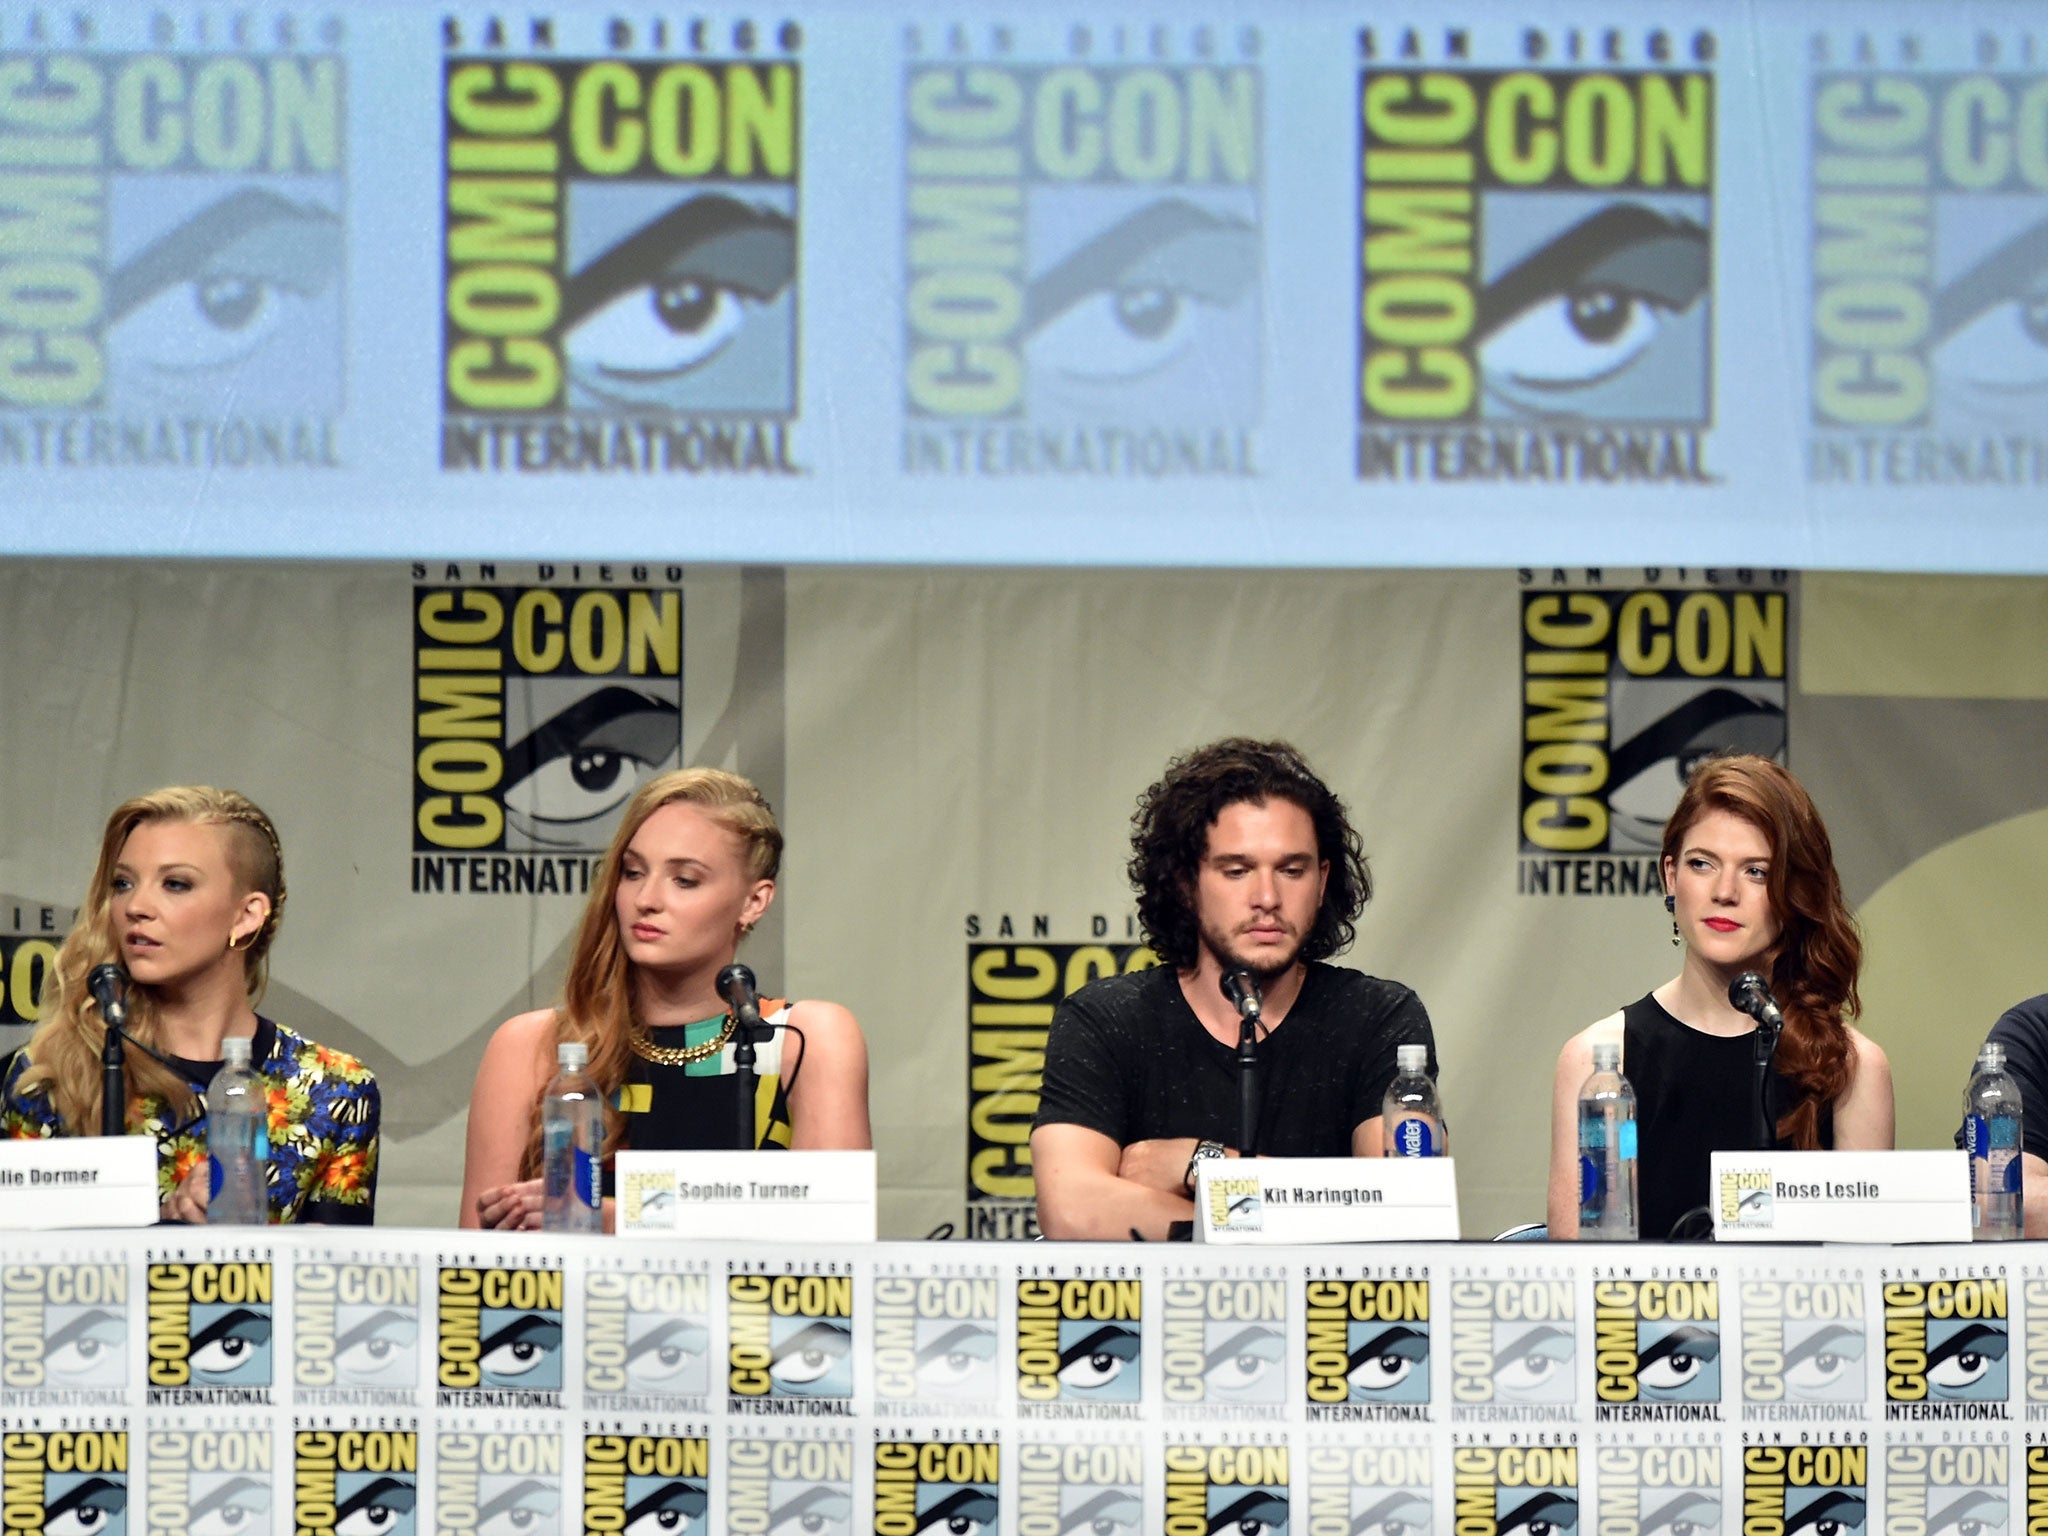 Kit Harington attended last year's Game of Thrones Comic Con panel but is not down to appear this year